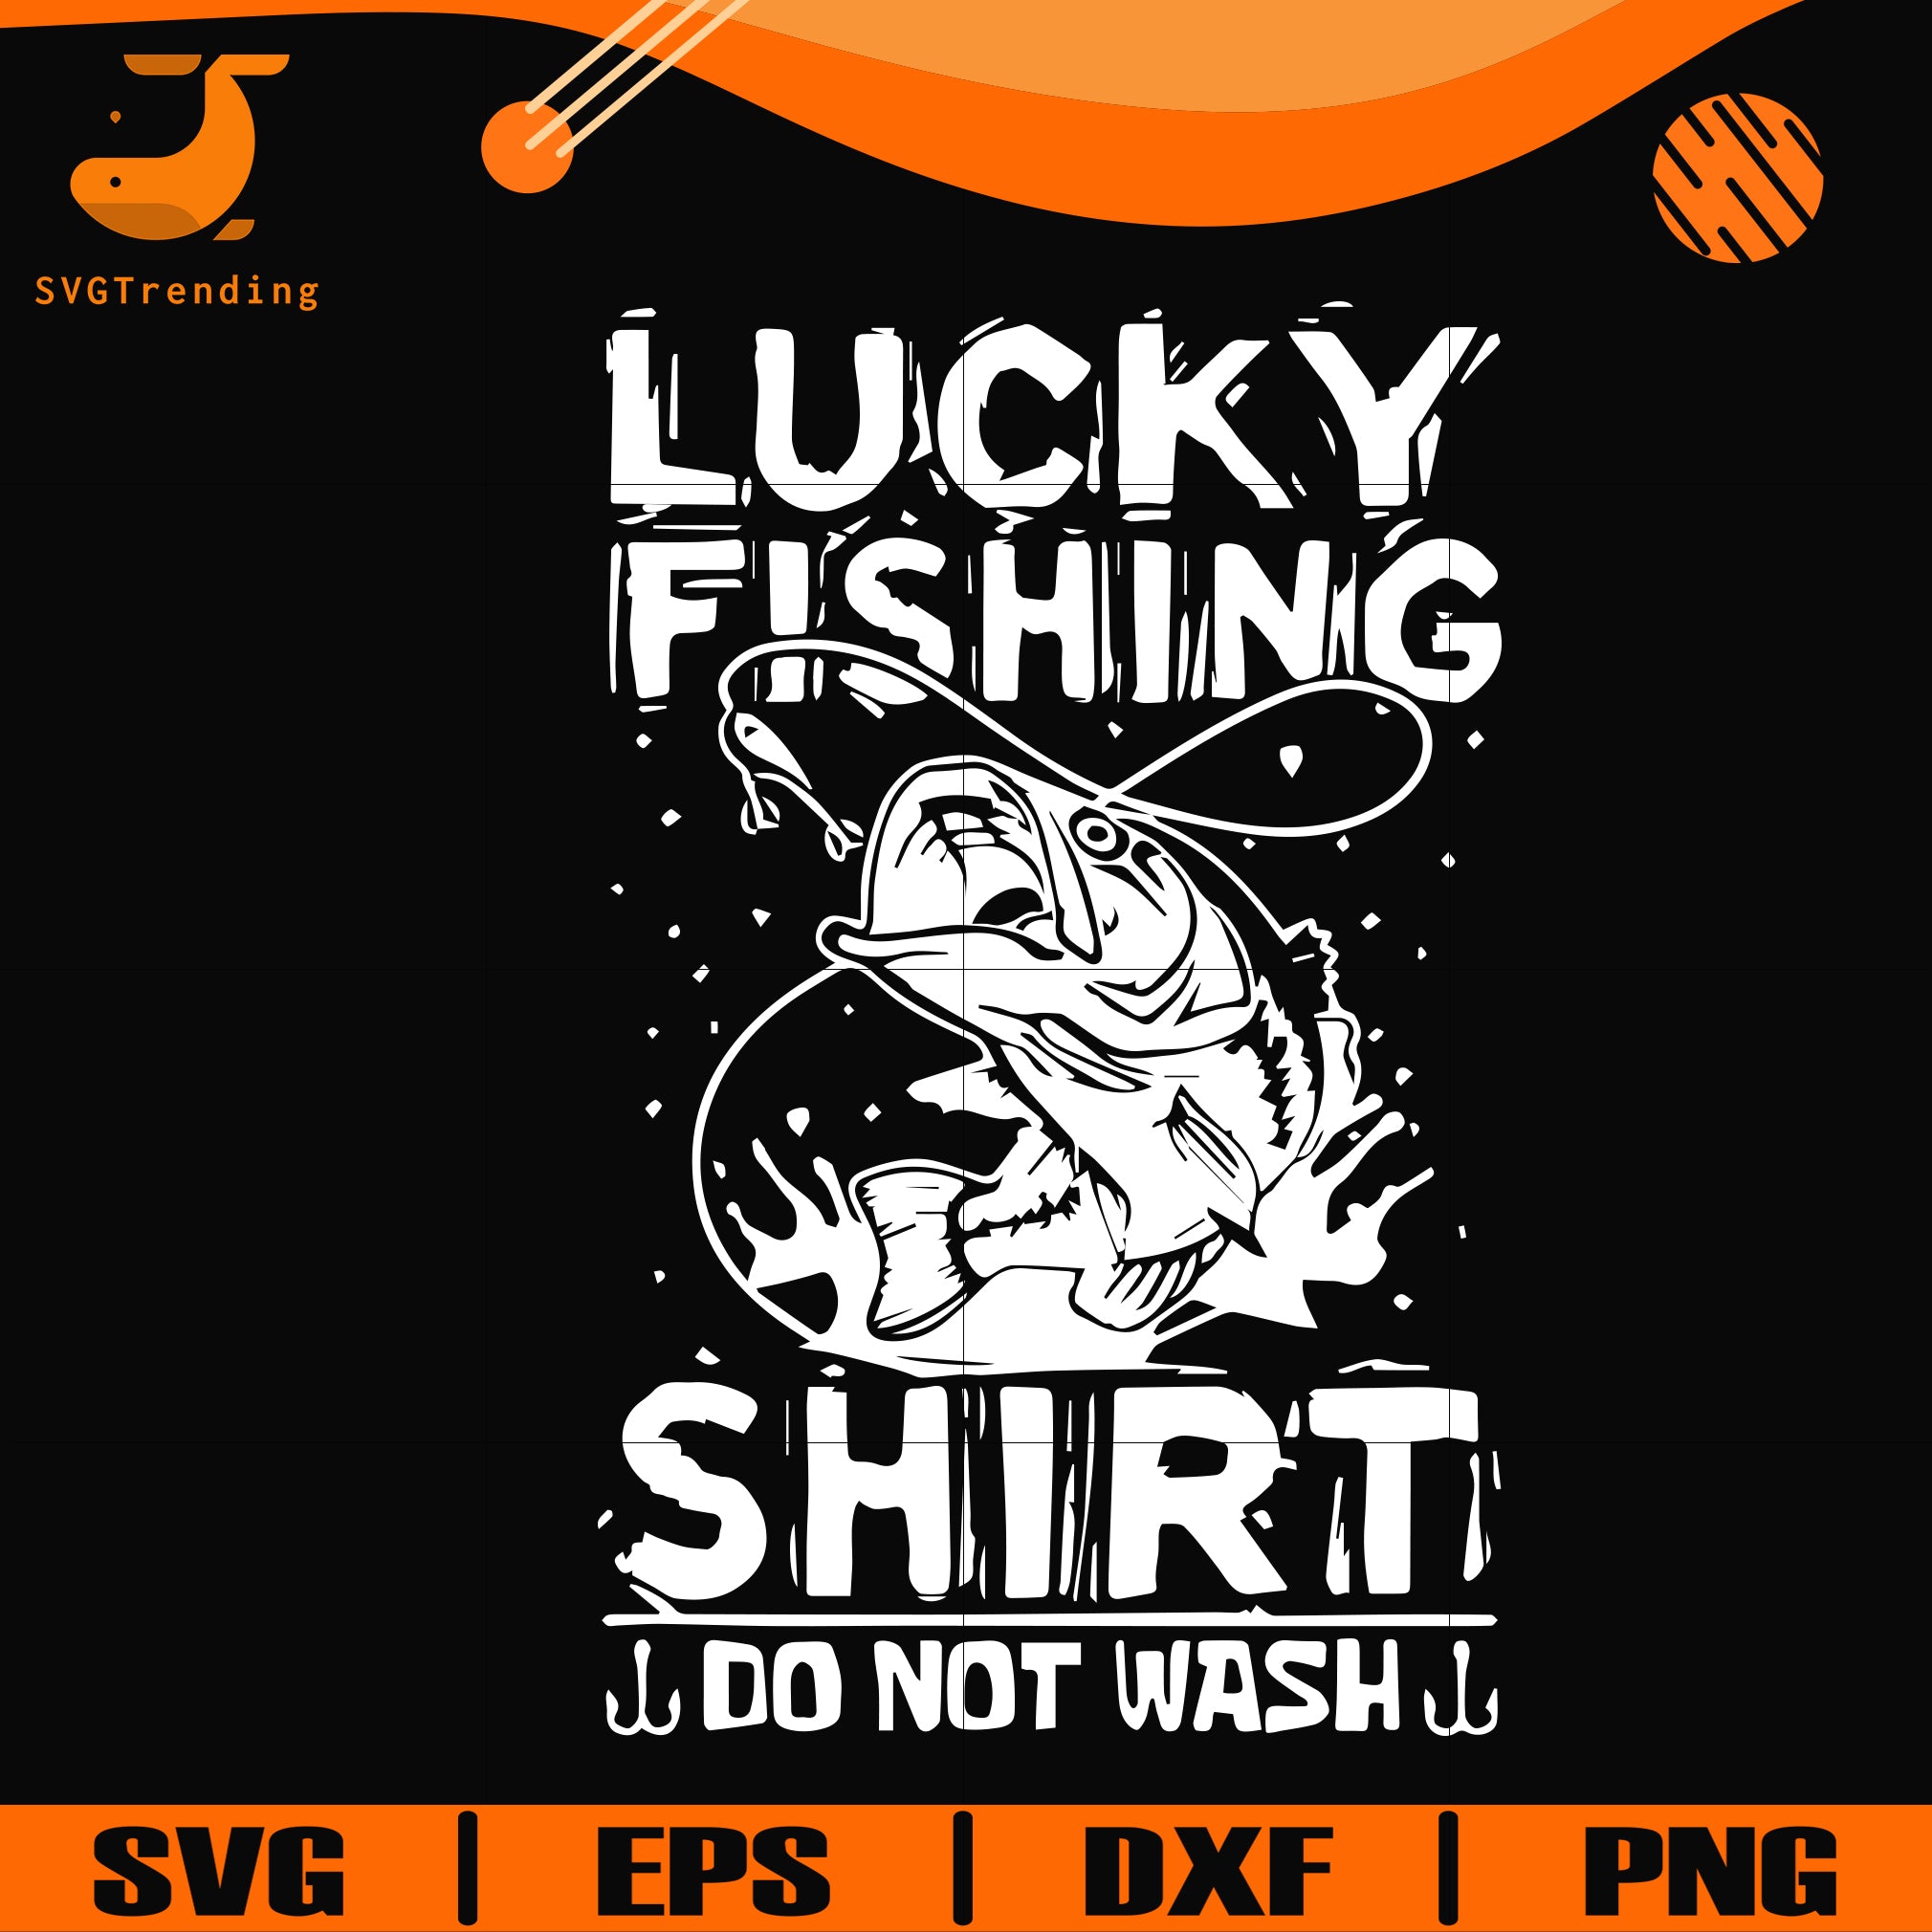 Lucky fishing shirt do not wash svg, png, dxf, eps digital file OTH007 –  DreamSVG Store